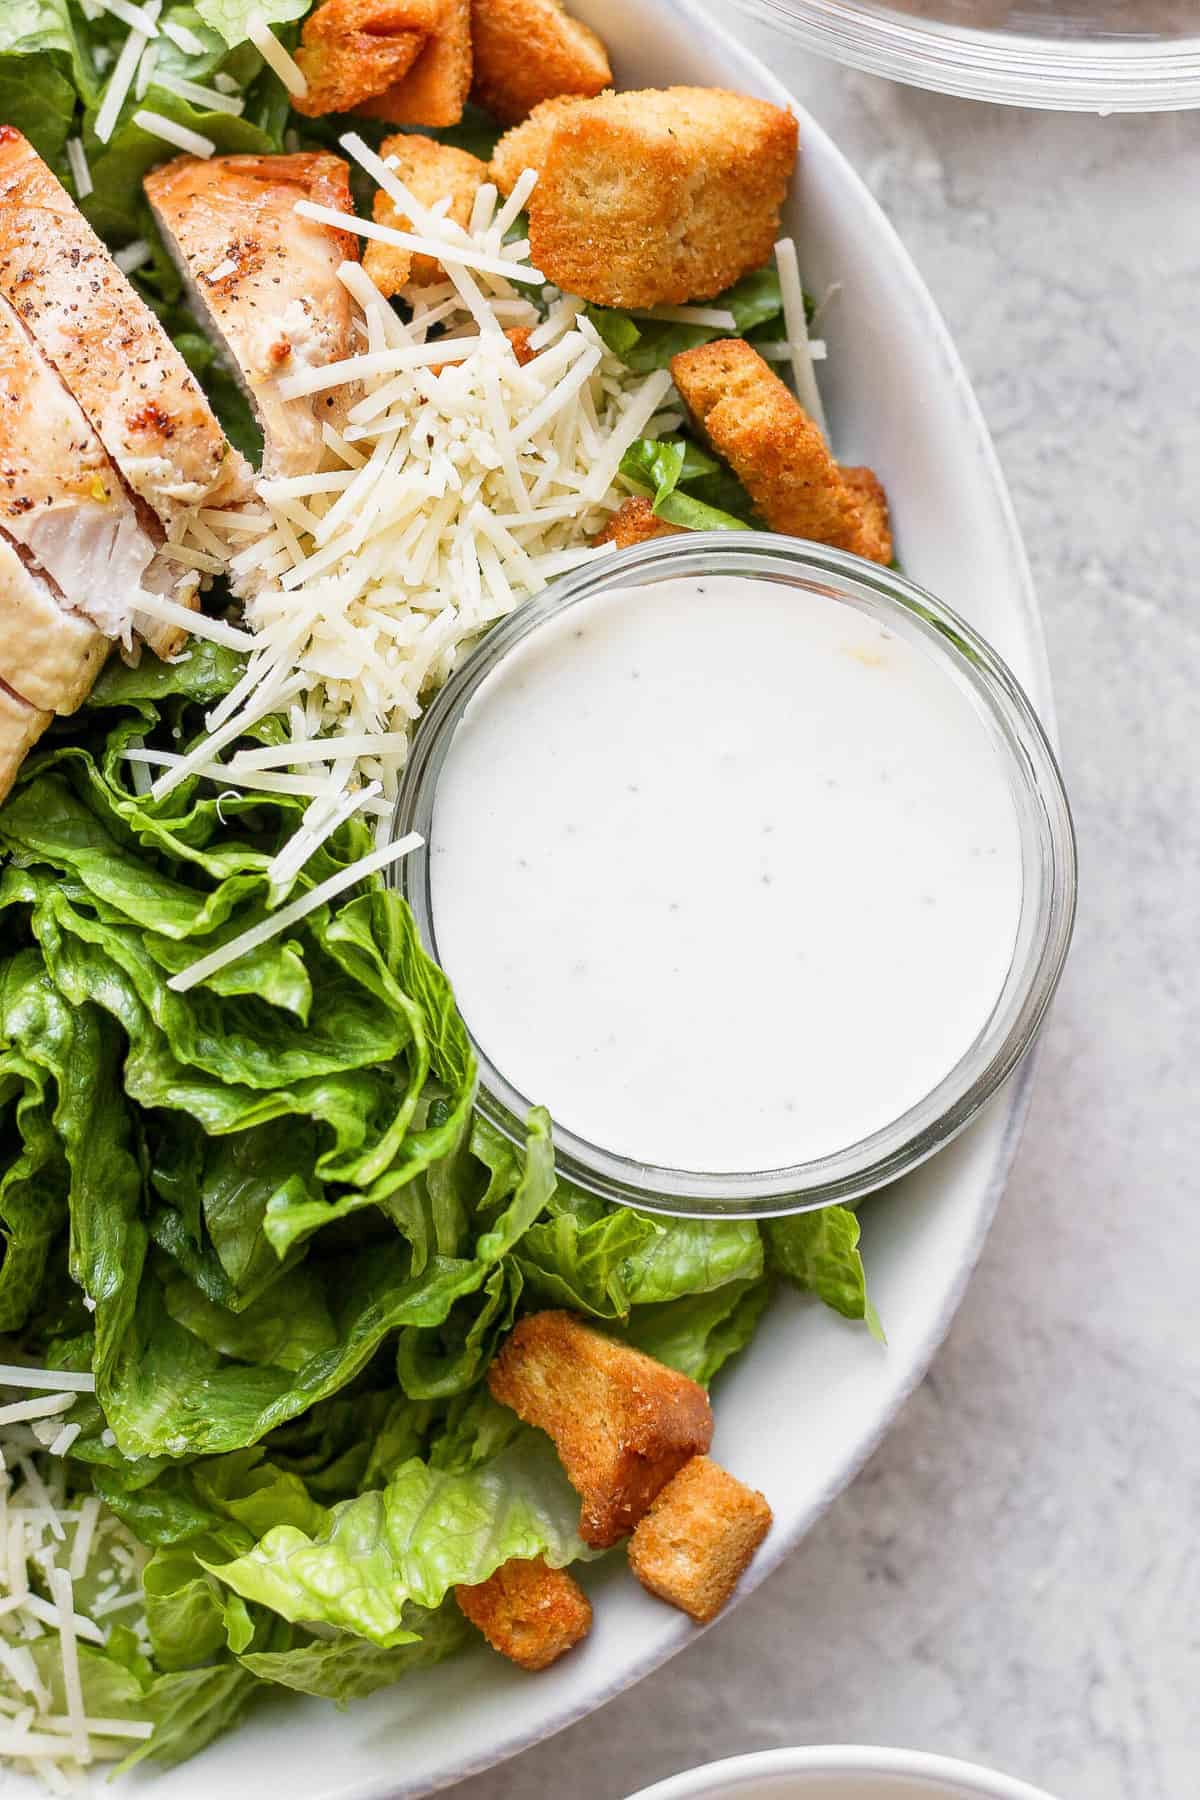 https://fitfoodiefinds.com/wp-content/uploads/2021/05/chicken-caesar-salad-11-scaled.jpg